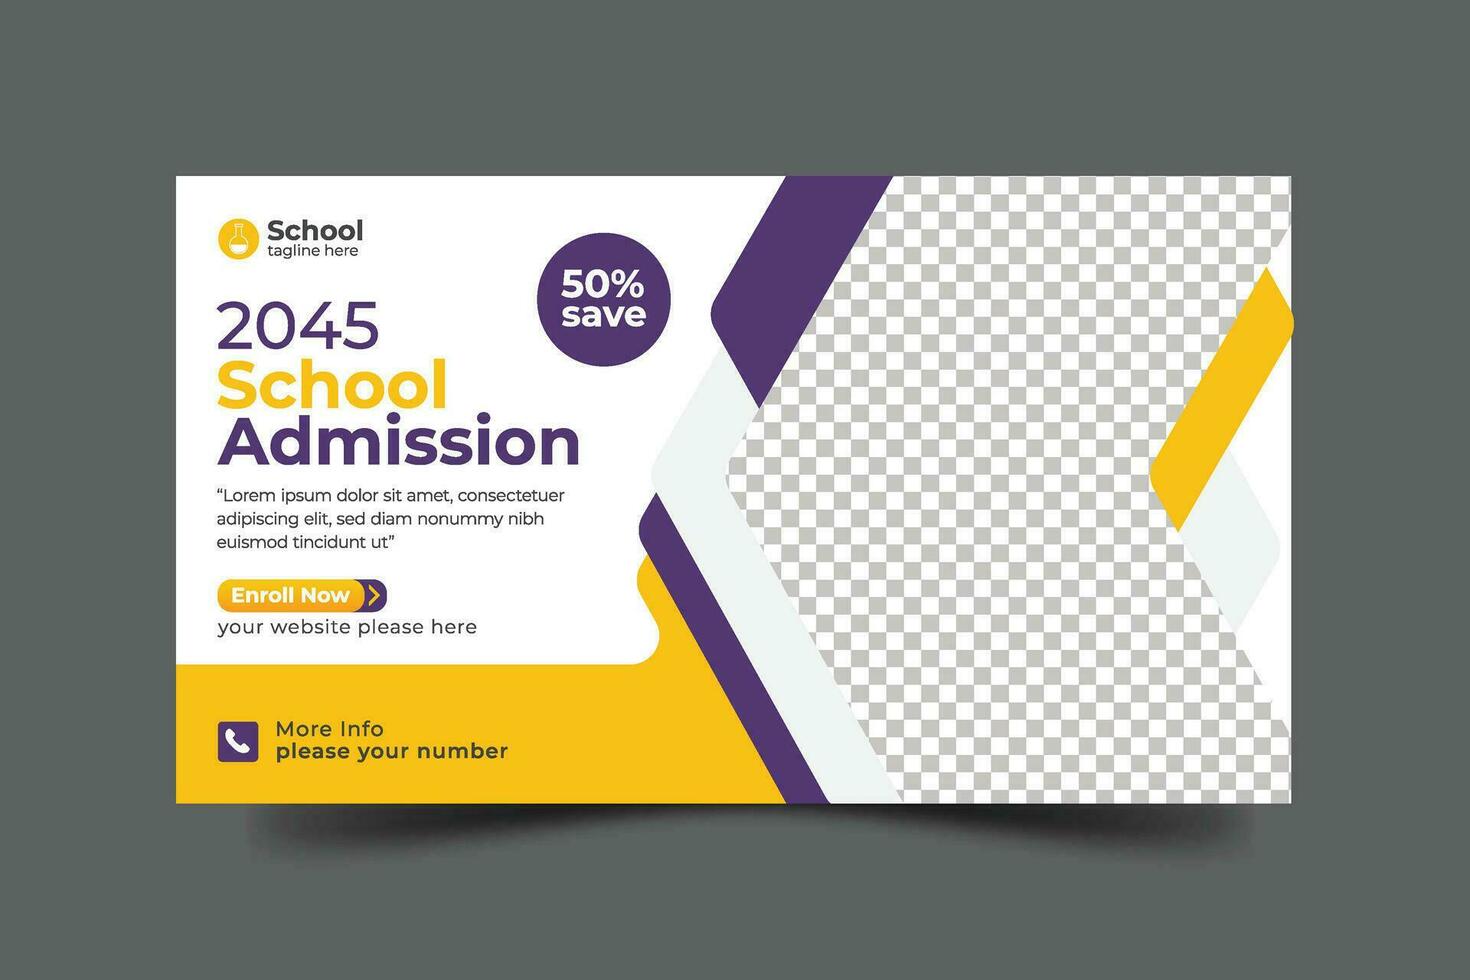 Vector school admission web banner template for school promotion post bannerVector school admission web banner template for school promotion post banner